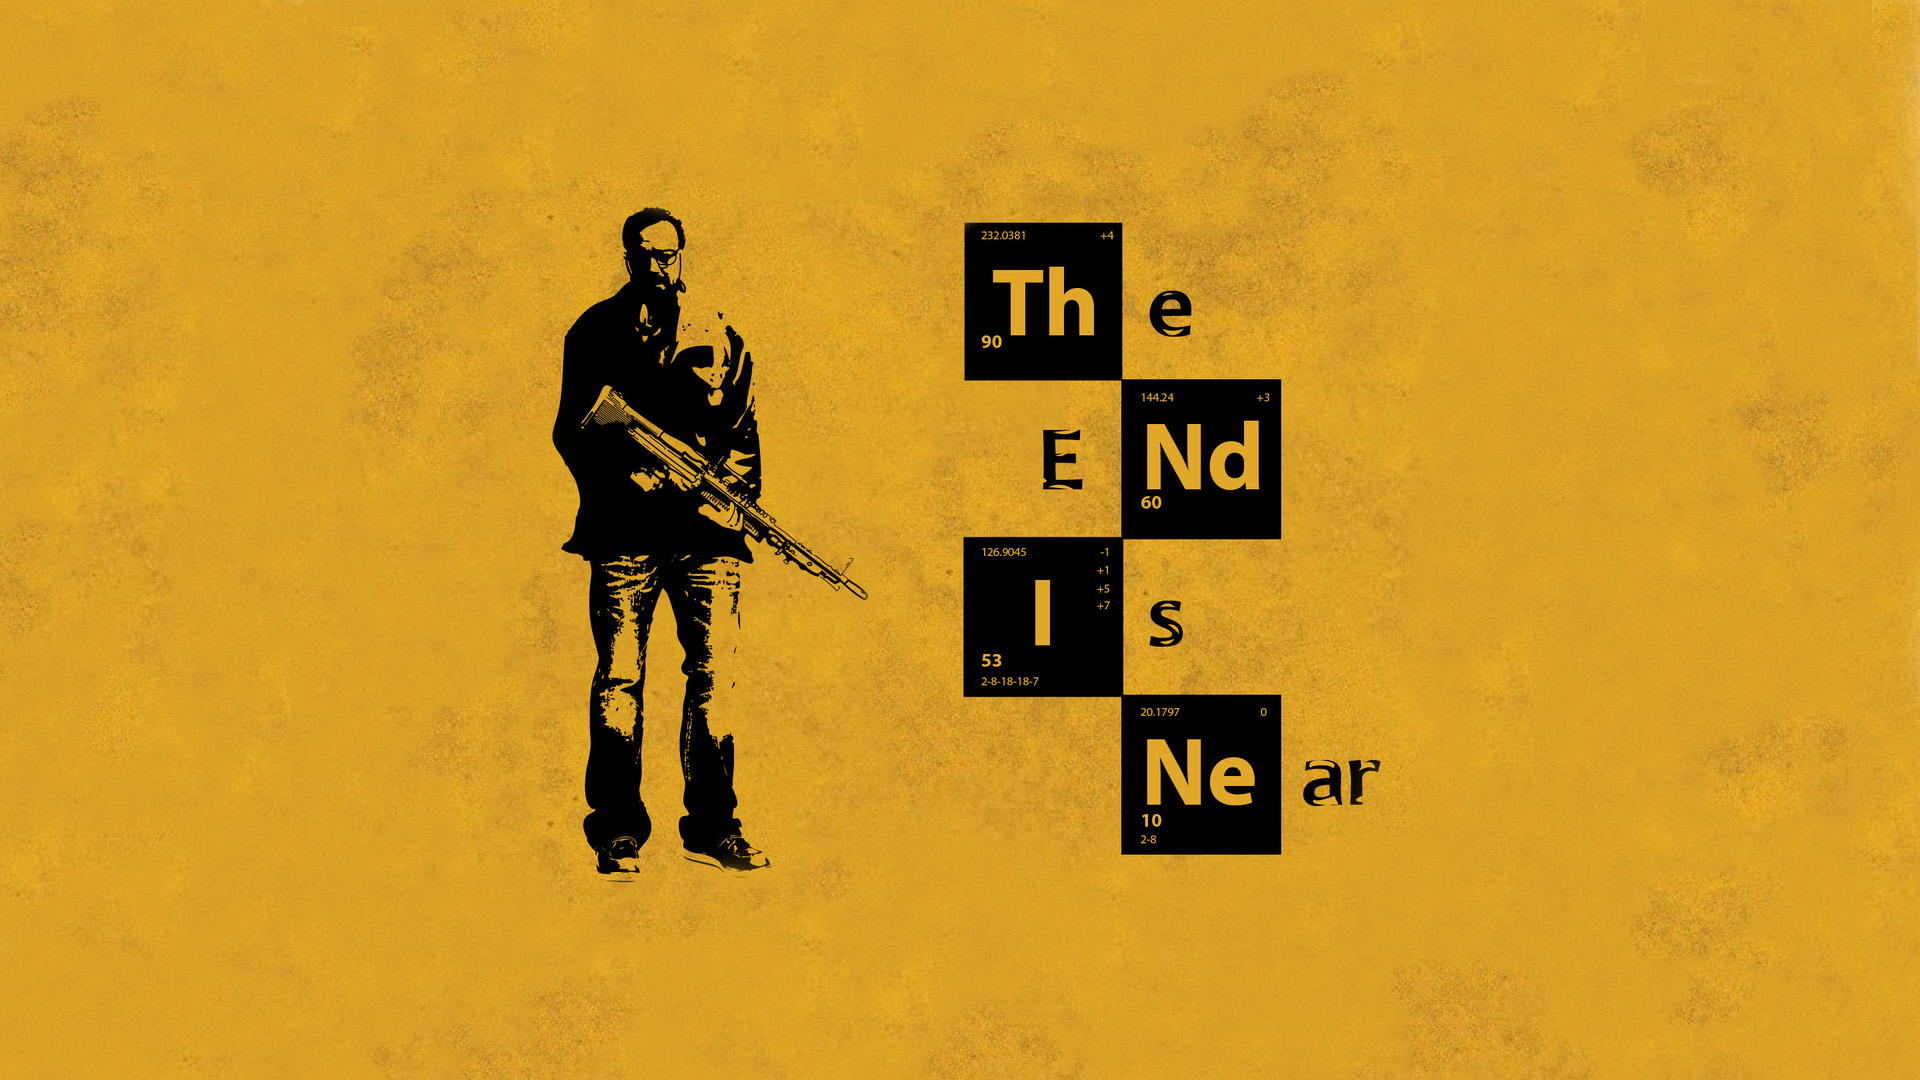 the-end-is-near-breaking-bad-hd-tv-shows-4k-wallpapers-images